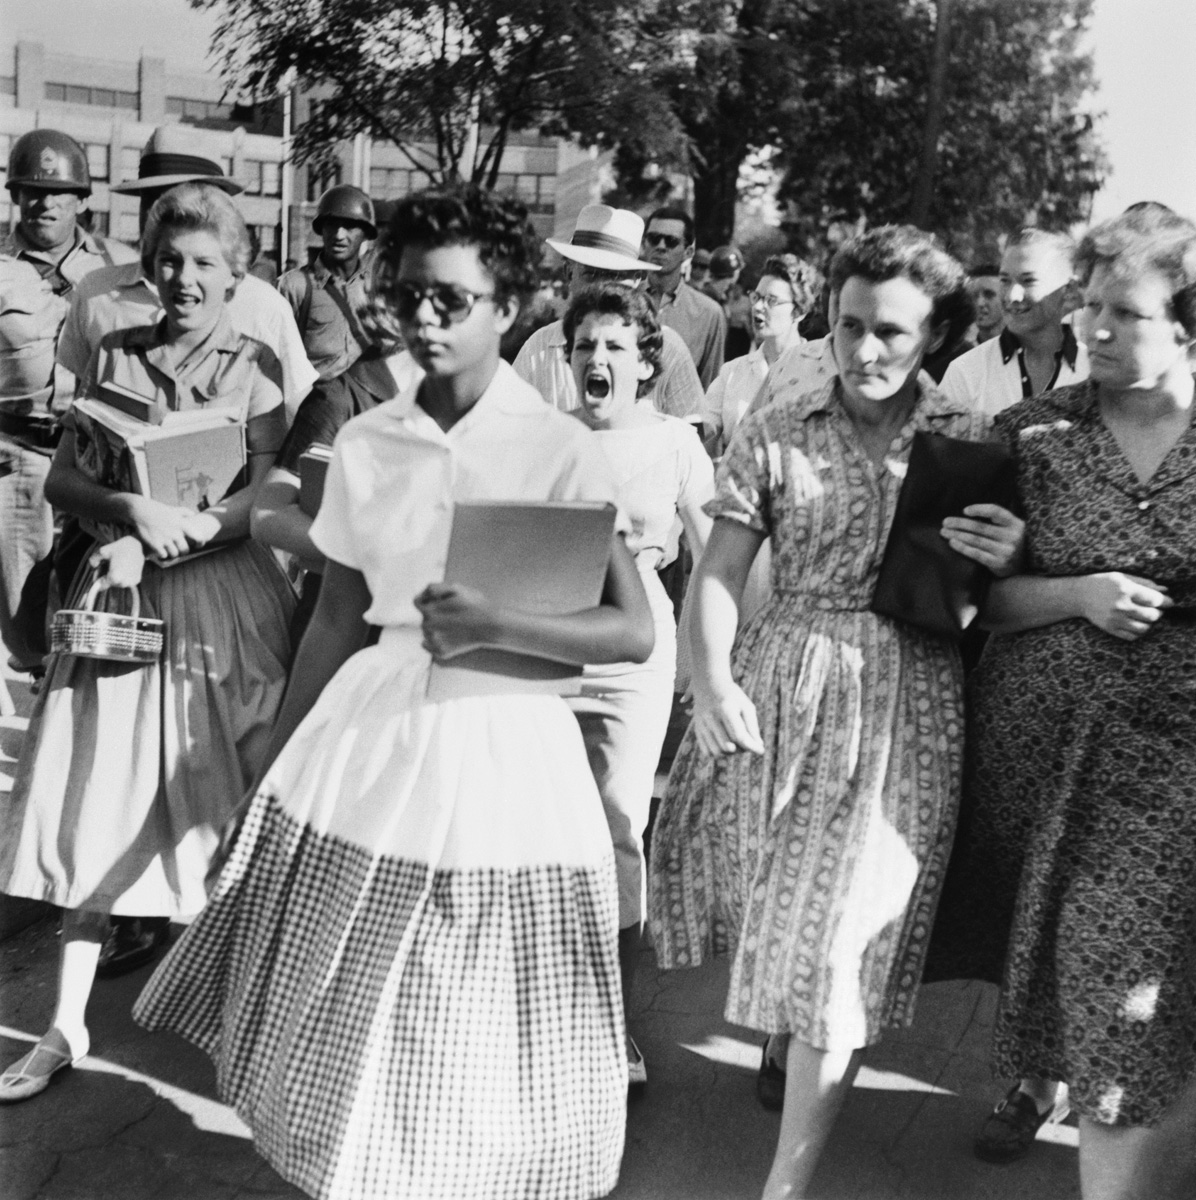 [Elizabeth+Eckford+ignores+the+hostile+screams+and+stares+of+fellow+students+on+her+first+day+of+school.++She+was+one+of+the+nine+negro+students+whose+integration+into+Little+Rock's+Central+High+School.jpg]